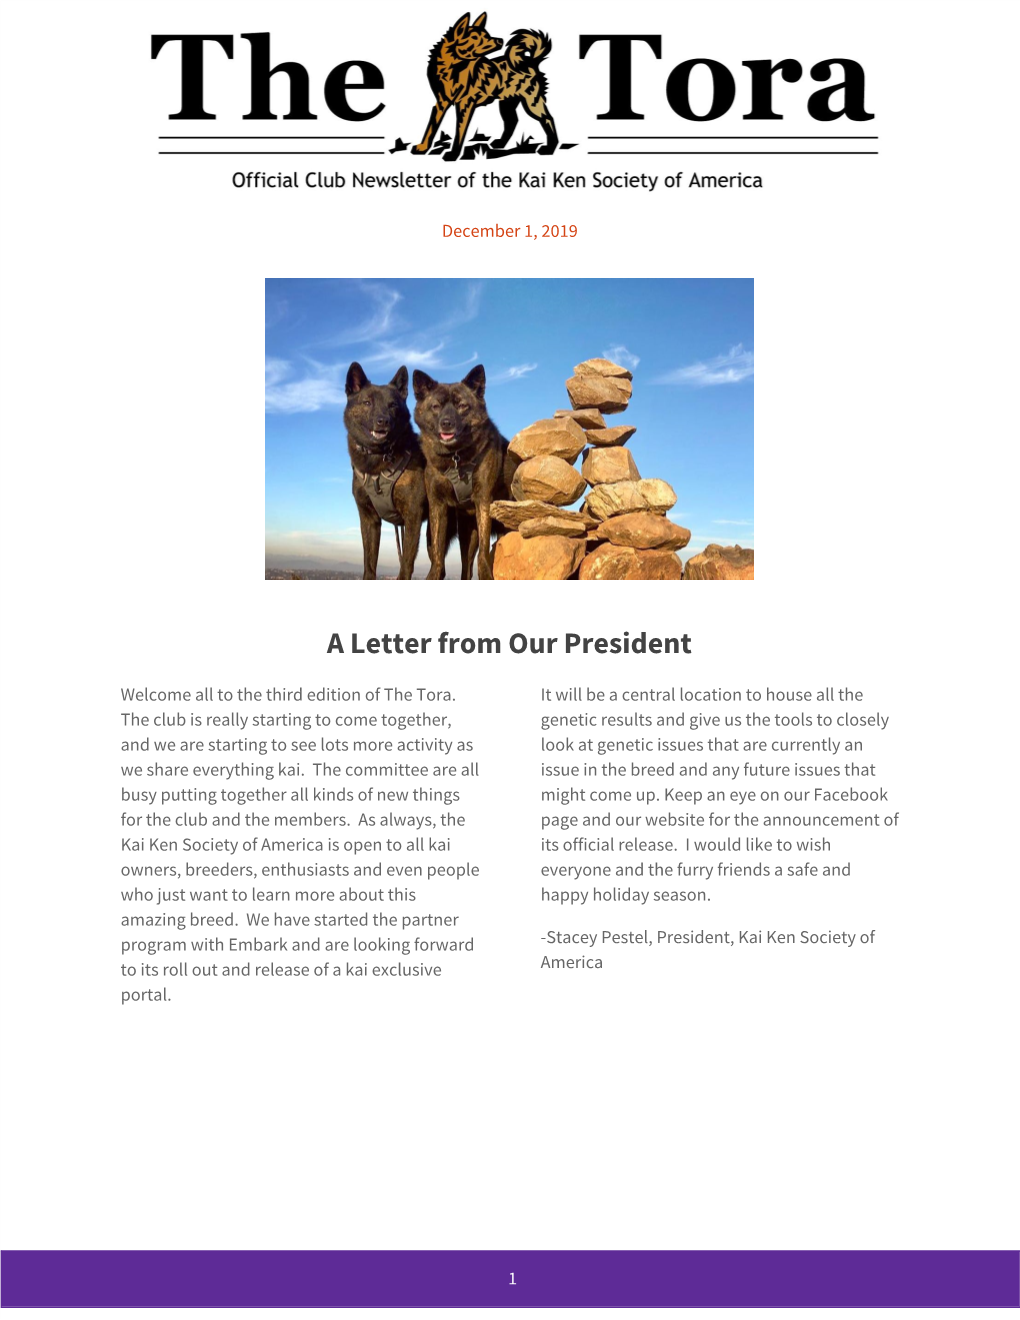 A Letter from Our President